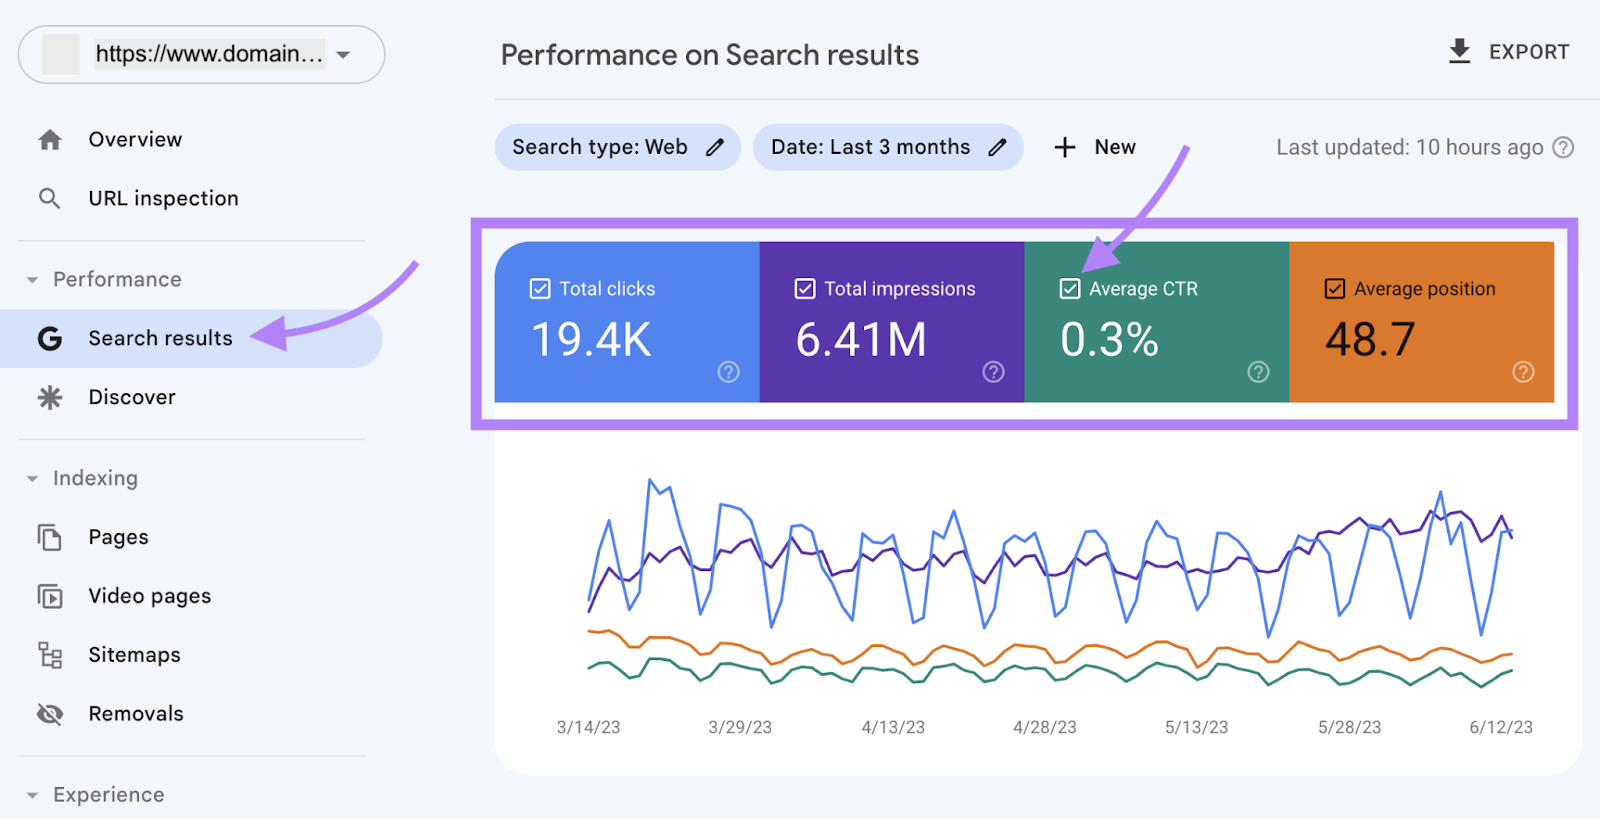 Google Search Console dashboard for search results performance.